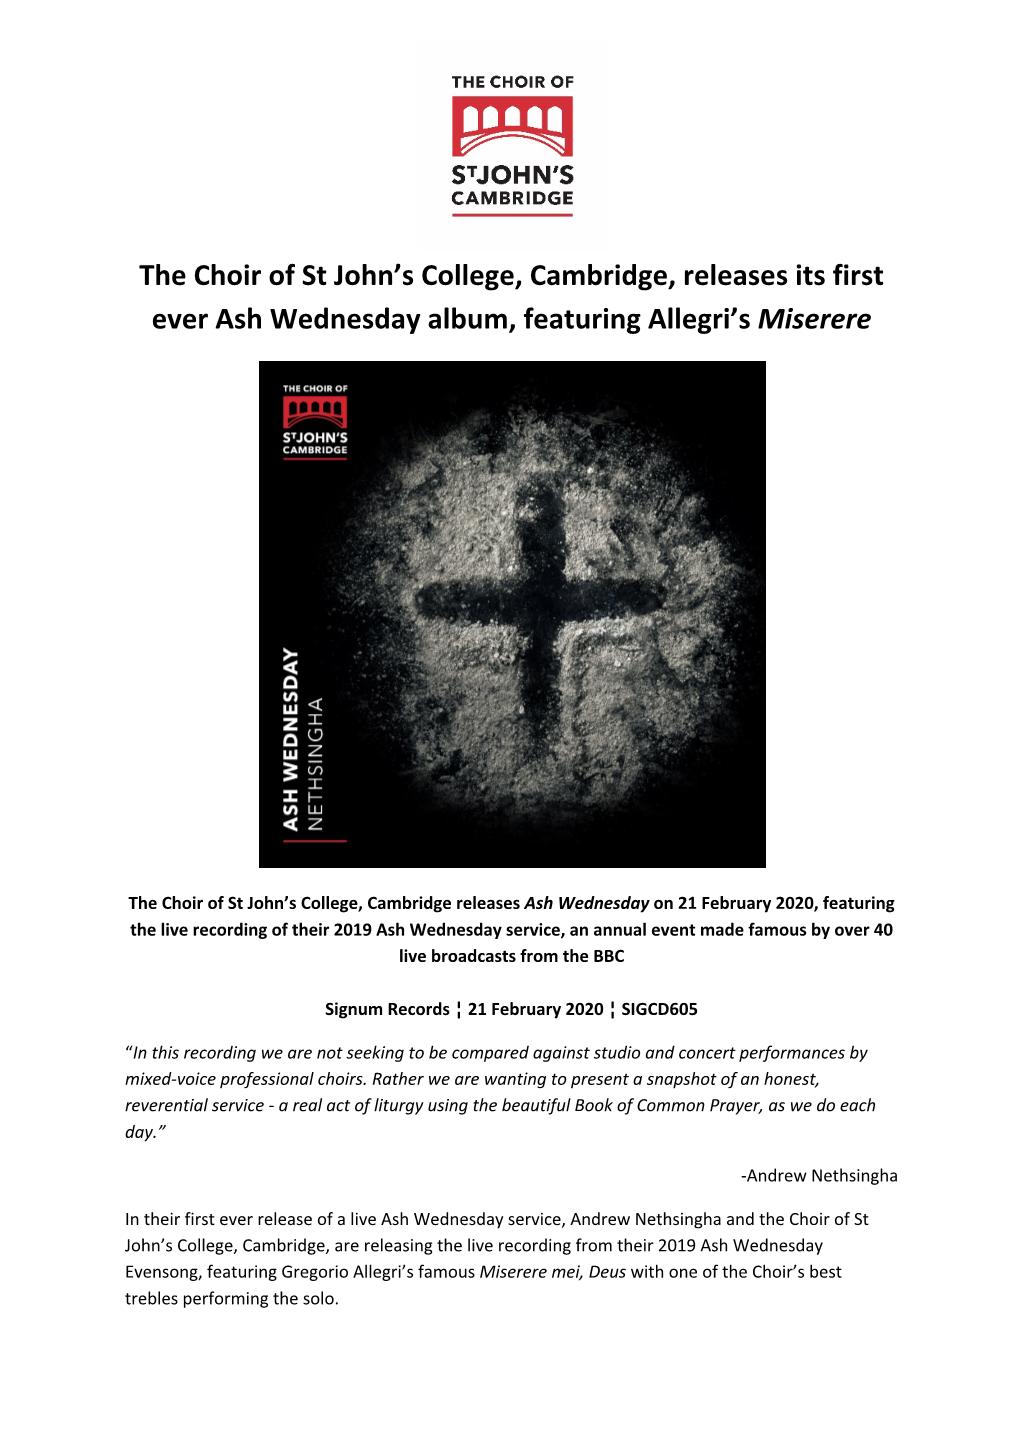 The Choir of St John's College, Cambridge, Releases Its First Ever